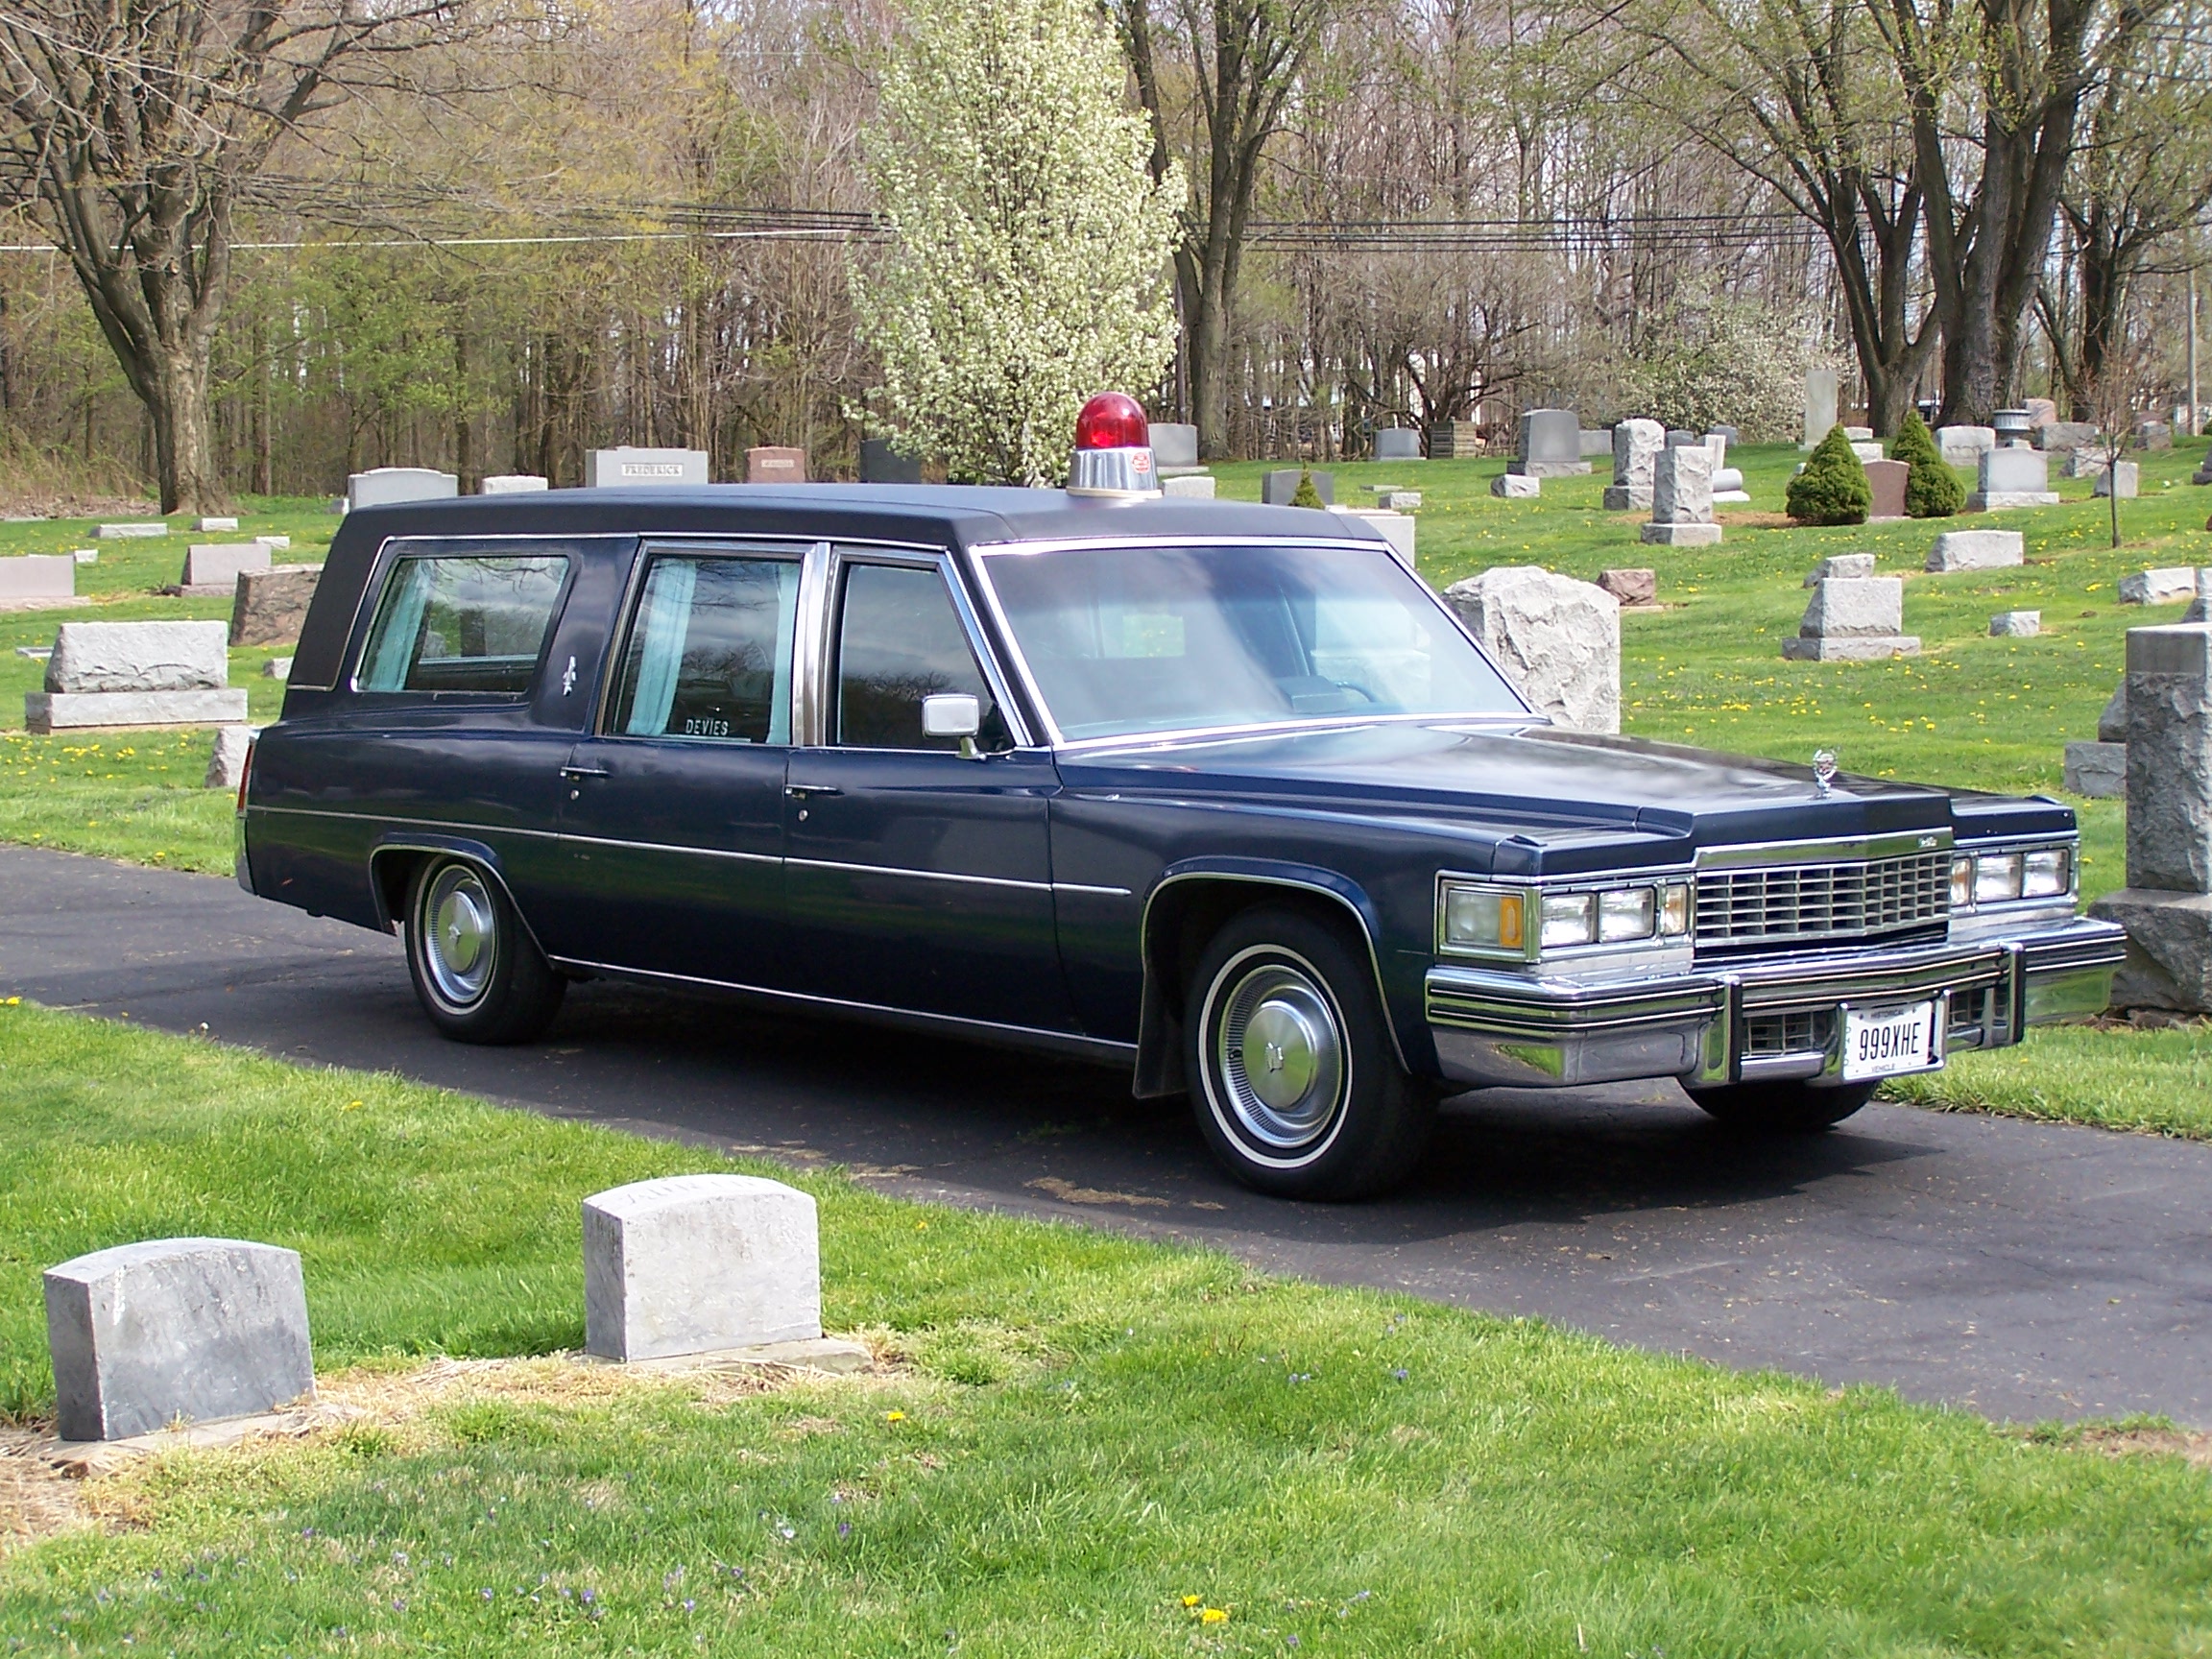 1977 Cadillac Superior Sovereign Combination purchased from the Bartley-Deckman Funeral Home in Malvern